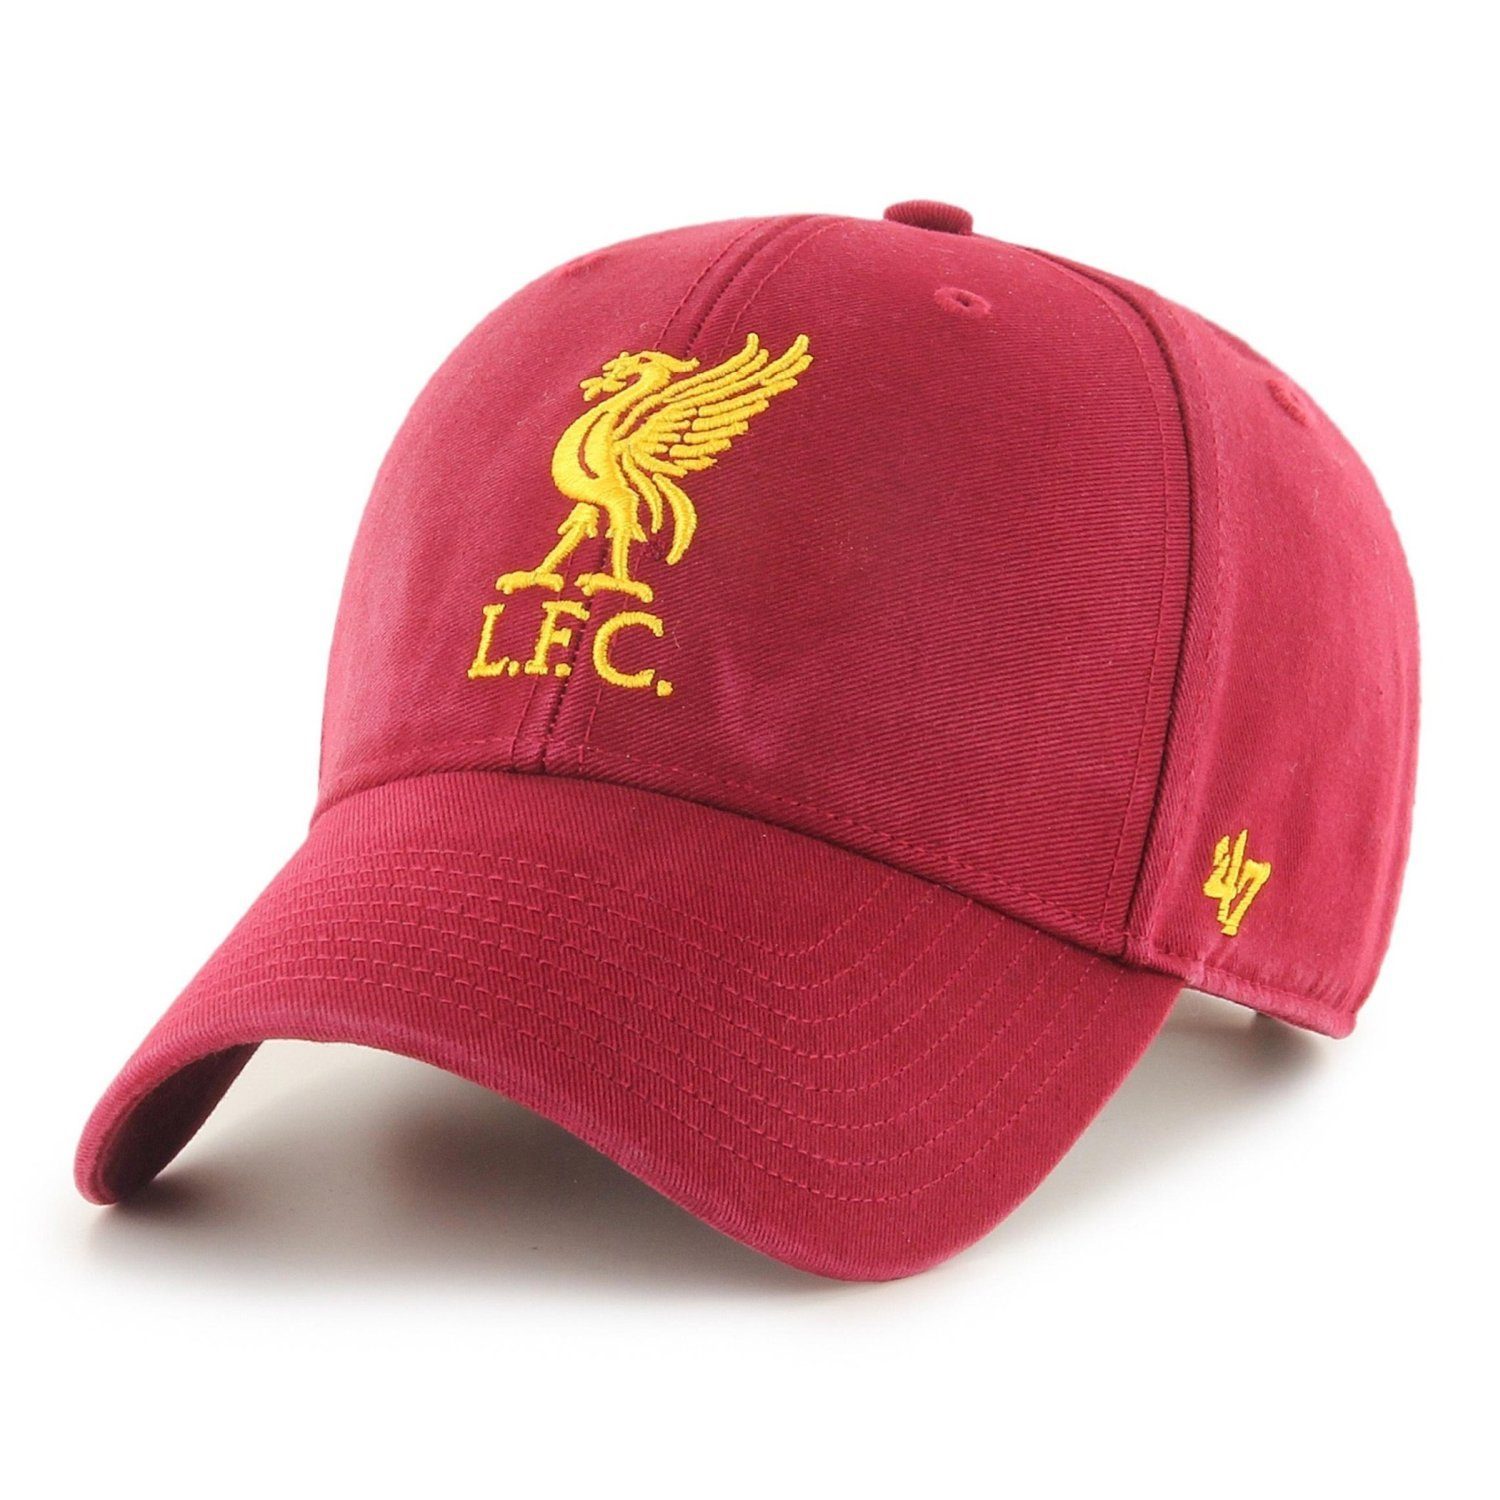 Trucker '47 Liverpool FC Cap Brand Relaxed dunkel Fit